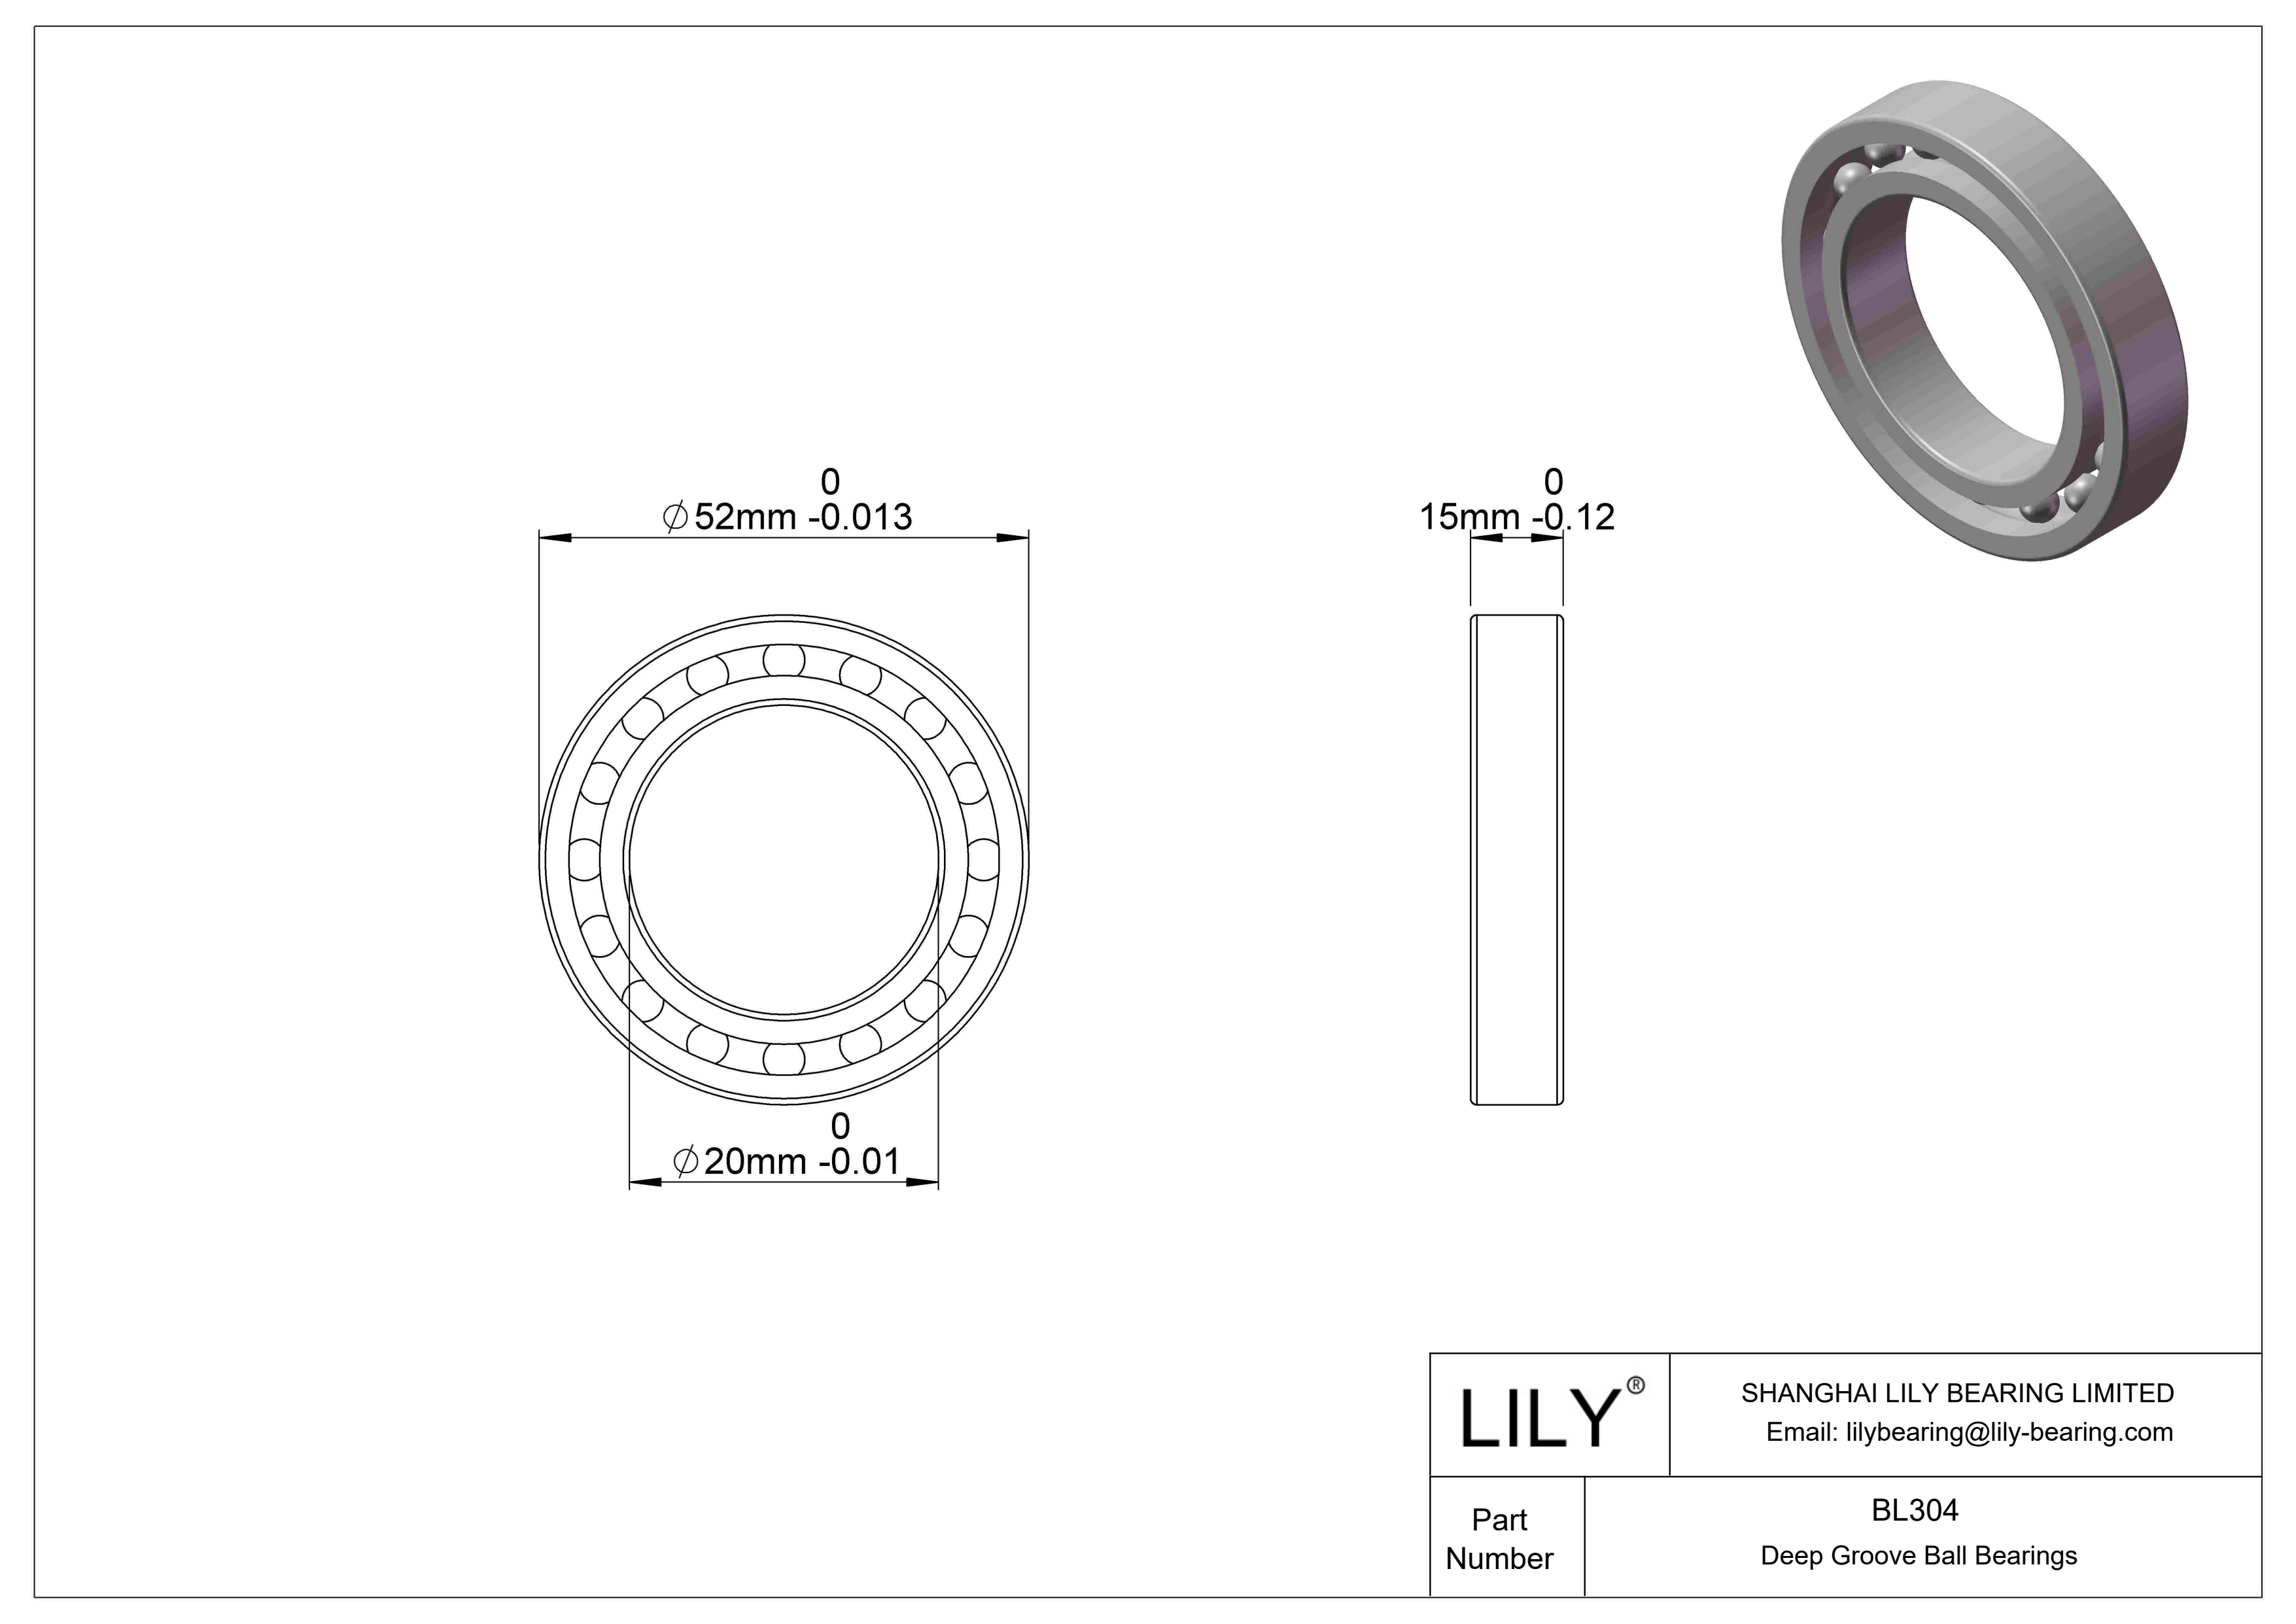 BL304 General Deep Groove Ball Bearing cad drawing